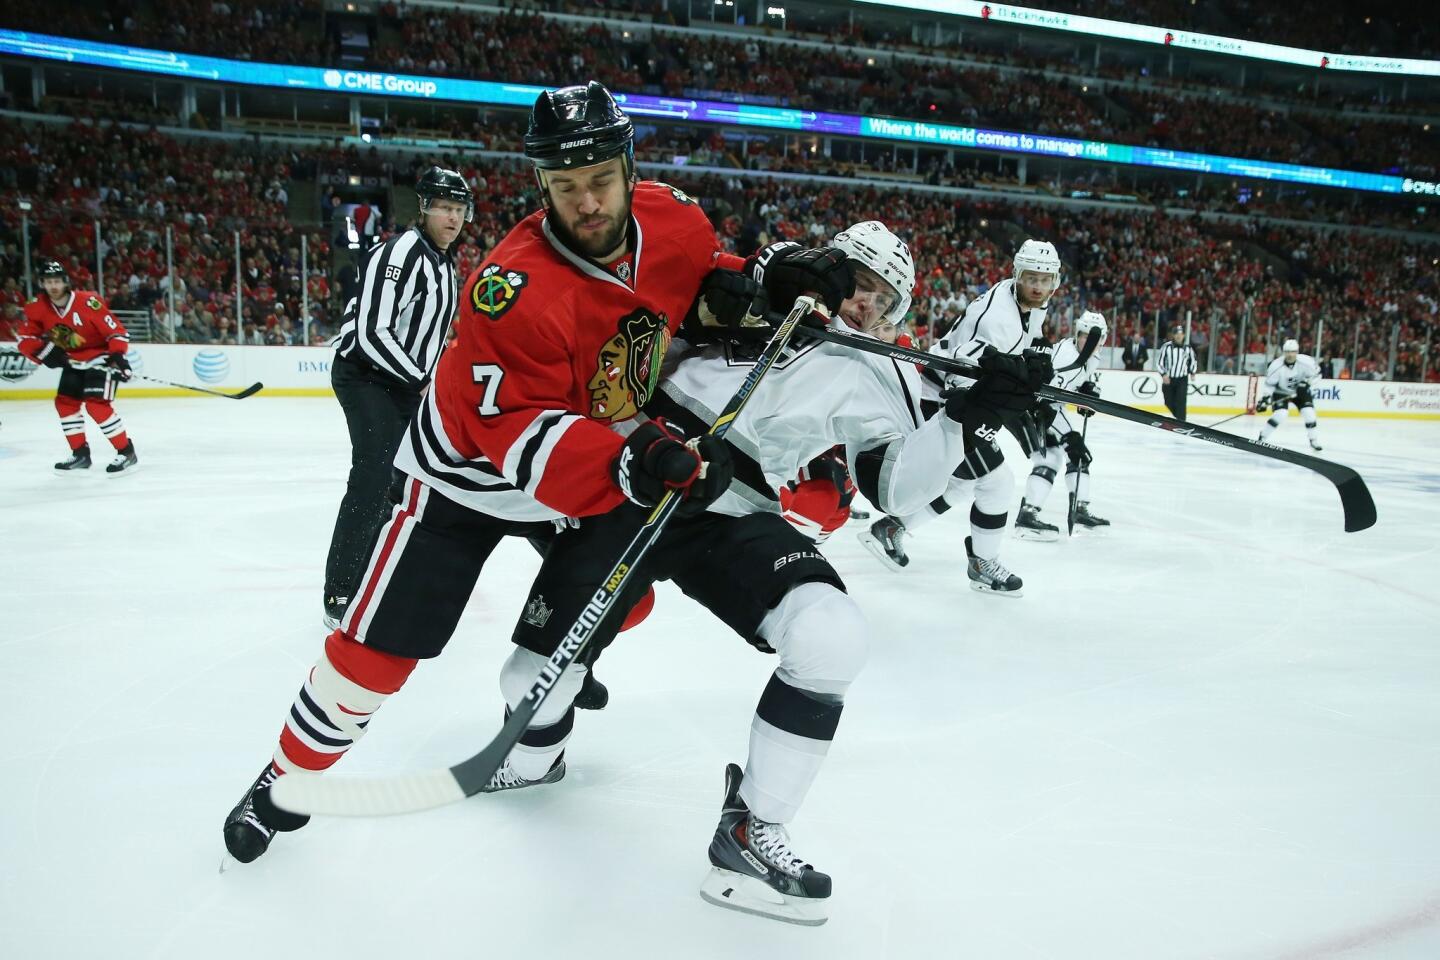 Brent Seabrook, Tanner Pearson